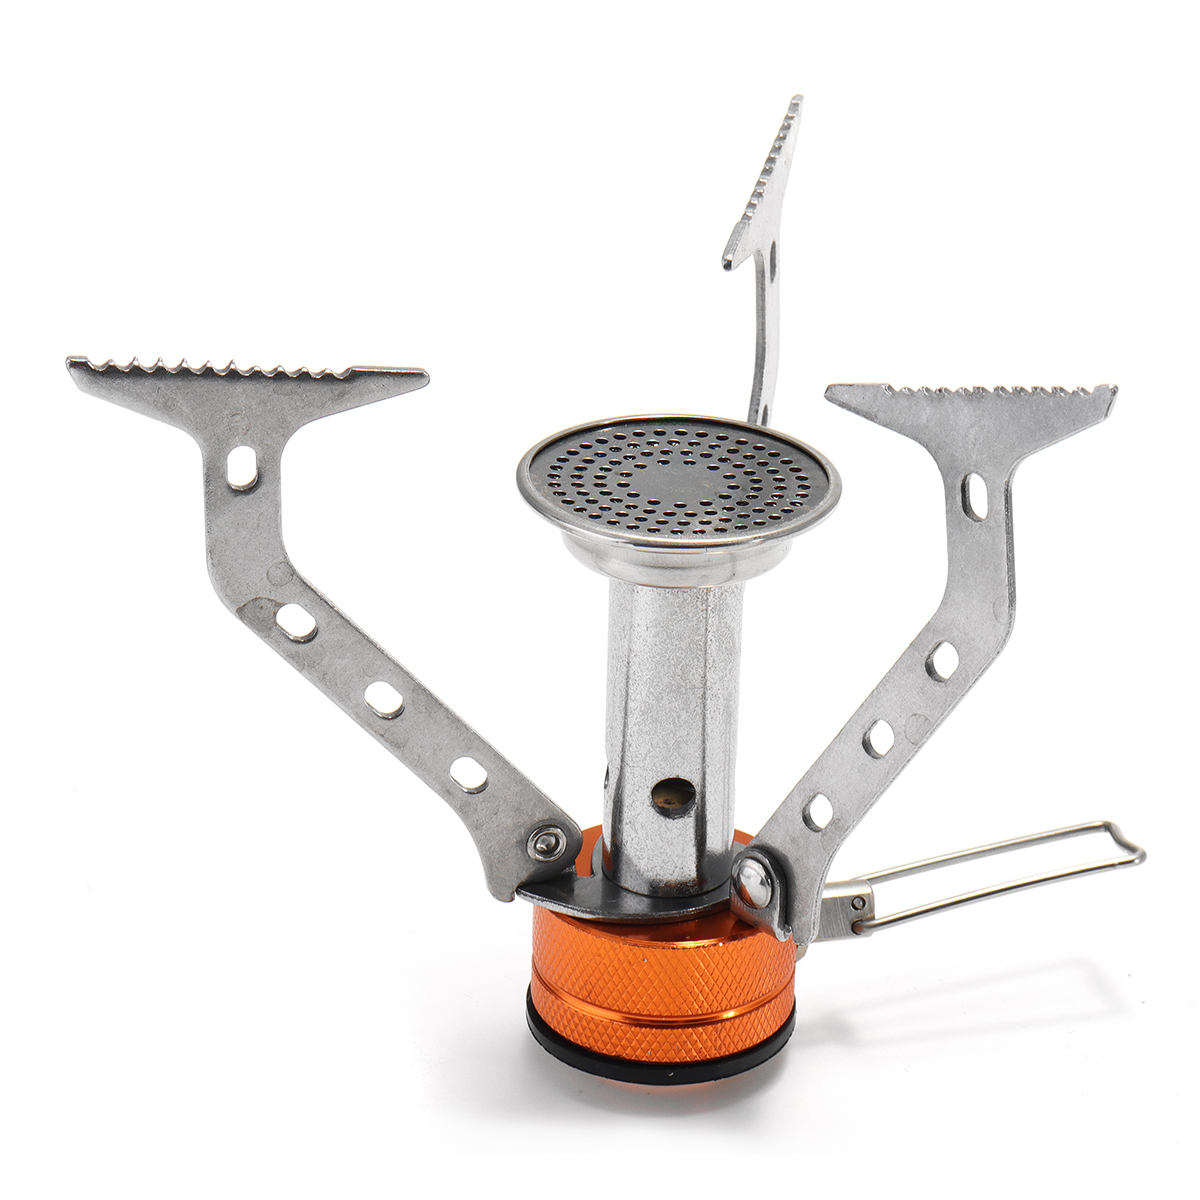 

3000W Outdoor Portable Mini Camping Cooking Stove Picnic Gas Burner Furnace Oven